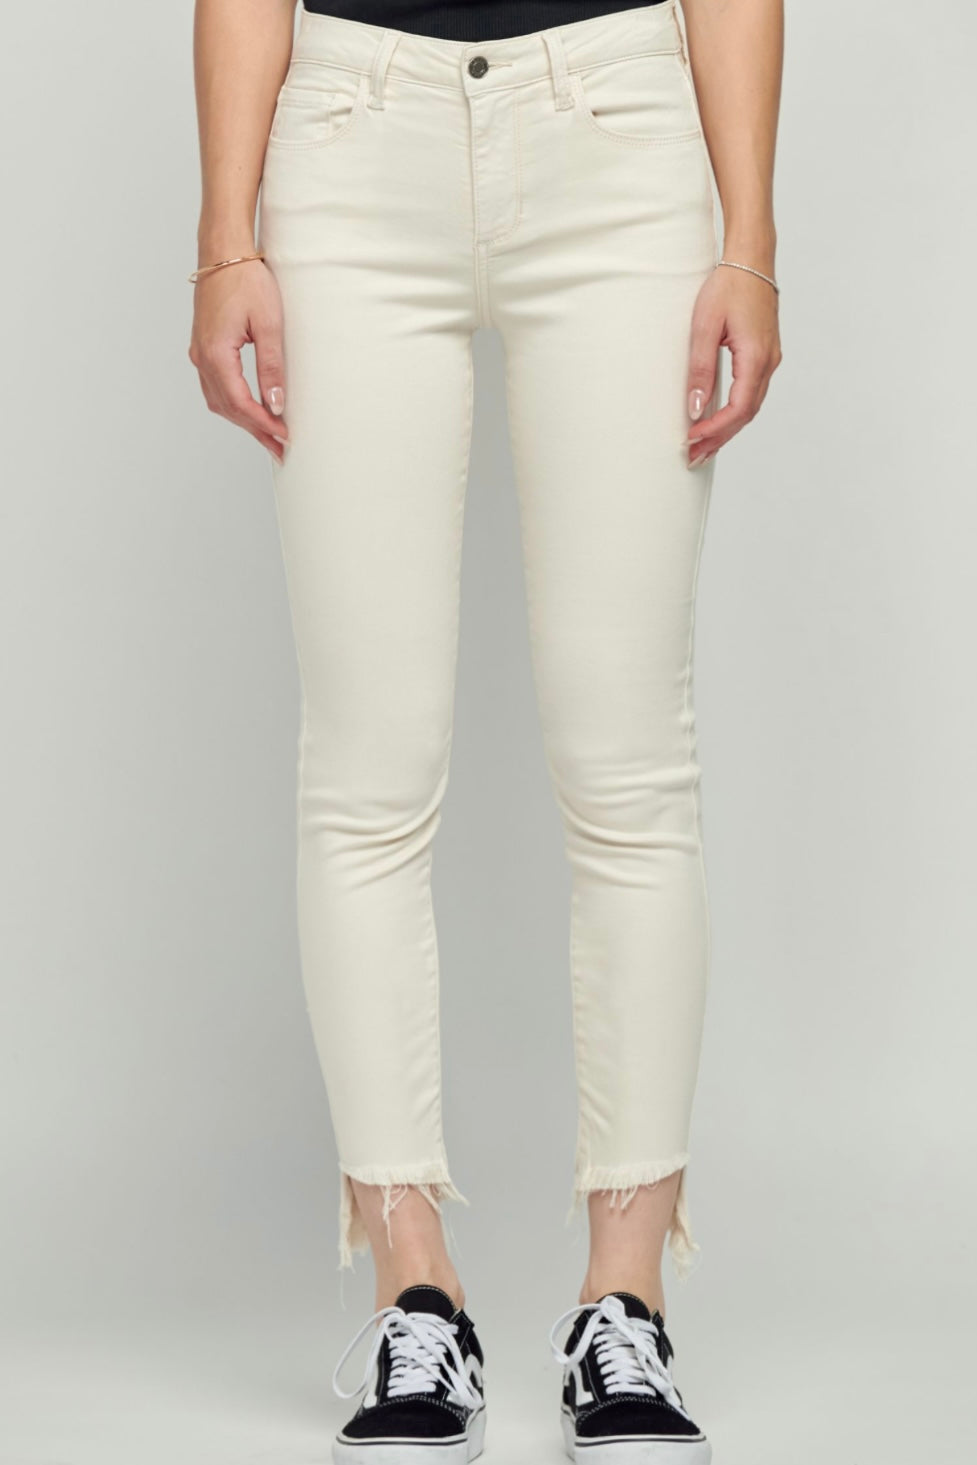 $20 SALE! Unbleached Cello Mid Rise Crop Skinny with Fray Hem